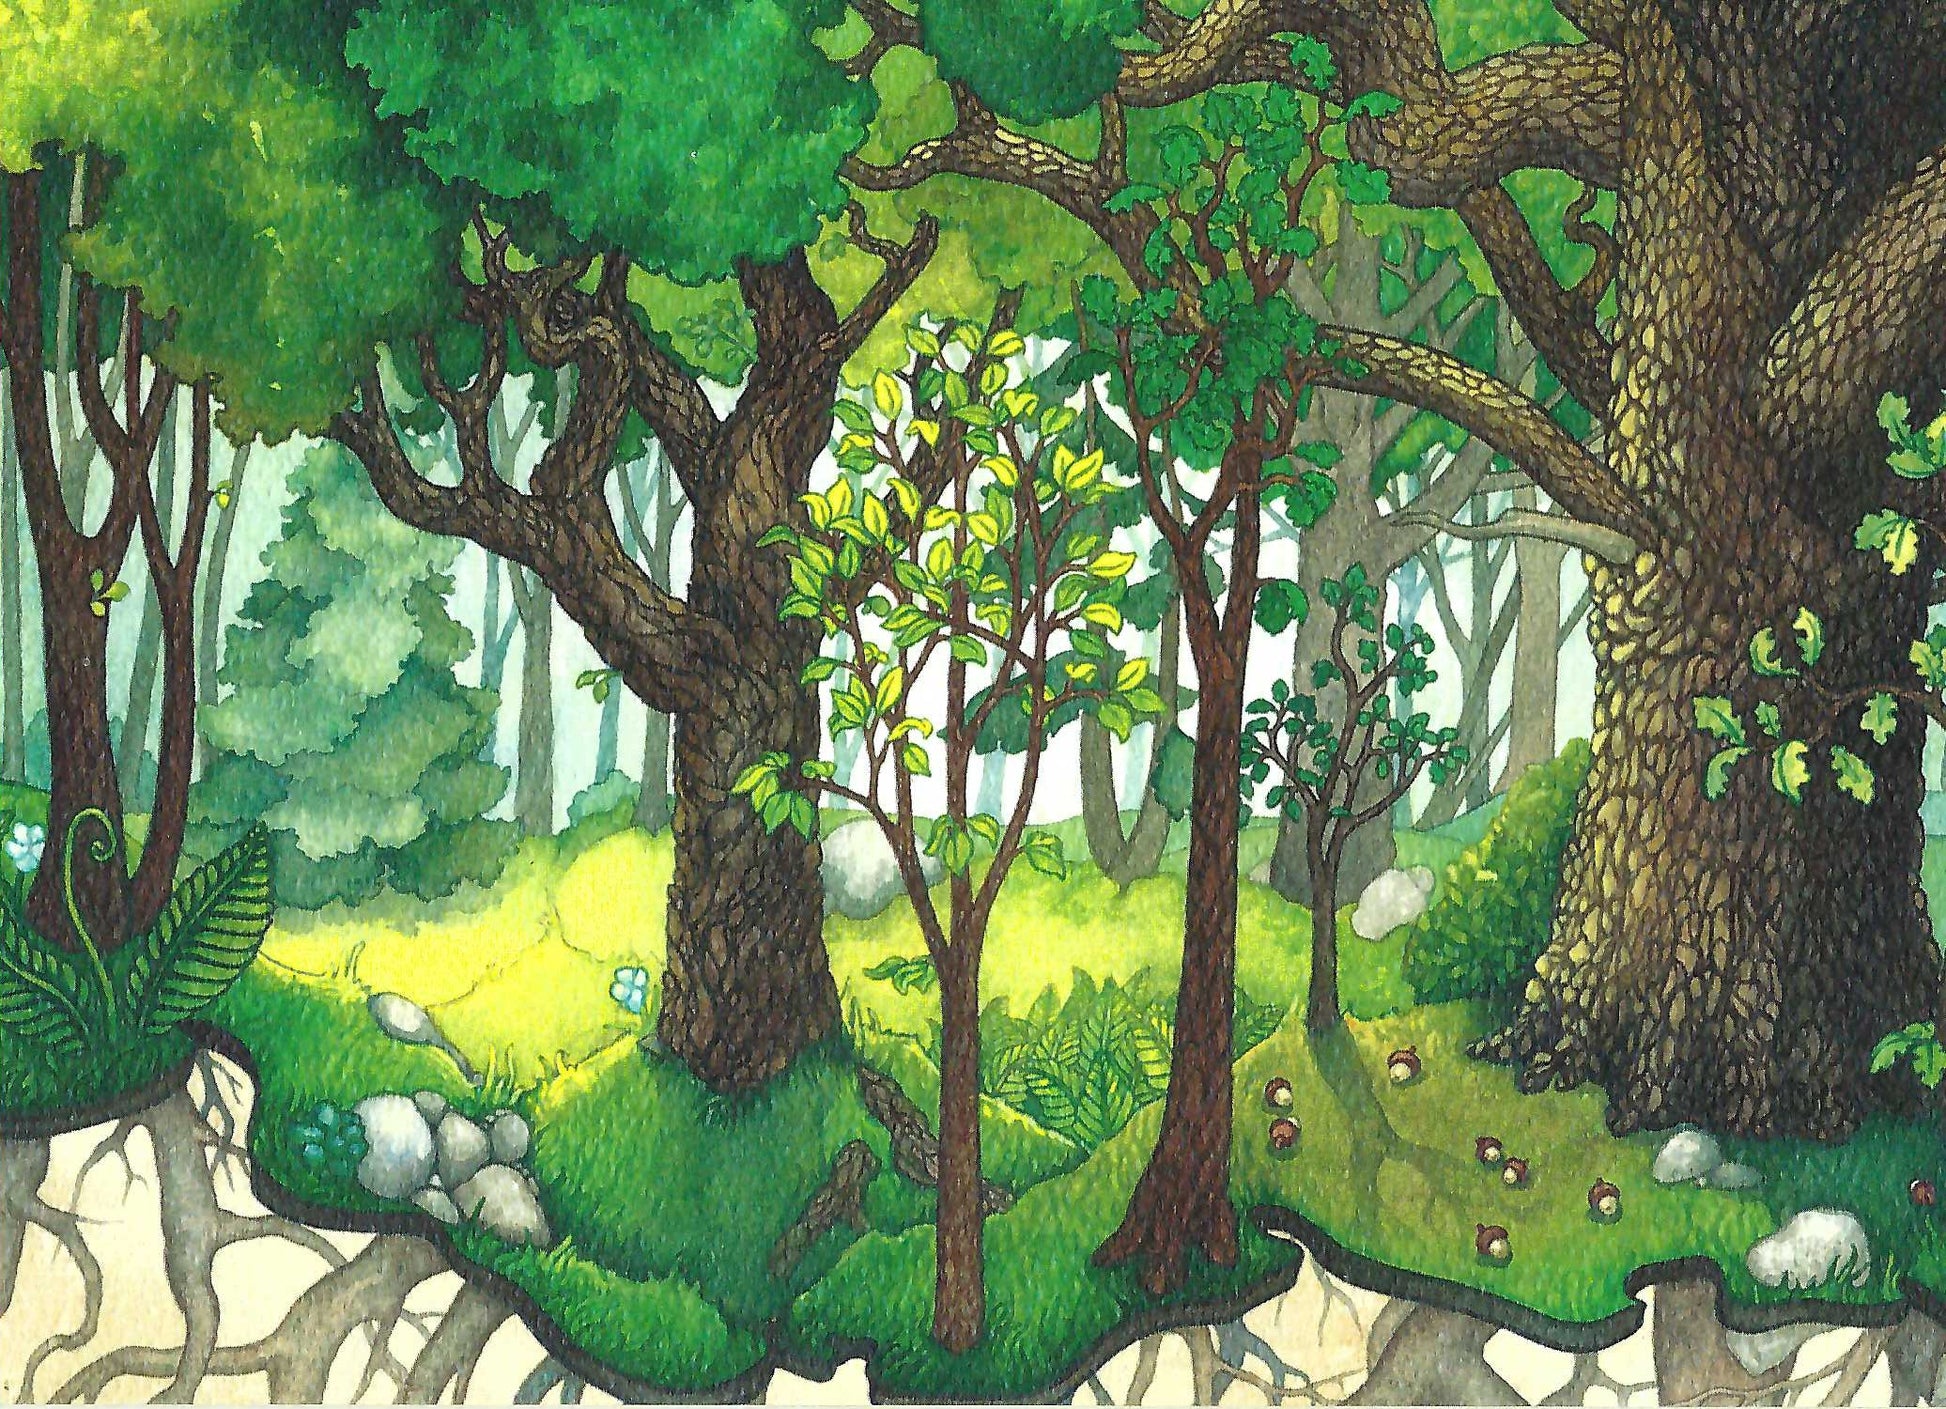 Family Roots Greeting Card.  A whimsical watercolor illustration by Jessica Waterstradt from the book, "The Acorn and the Oak."